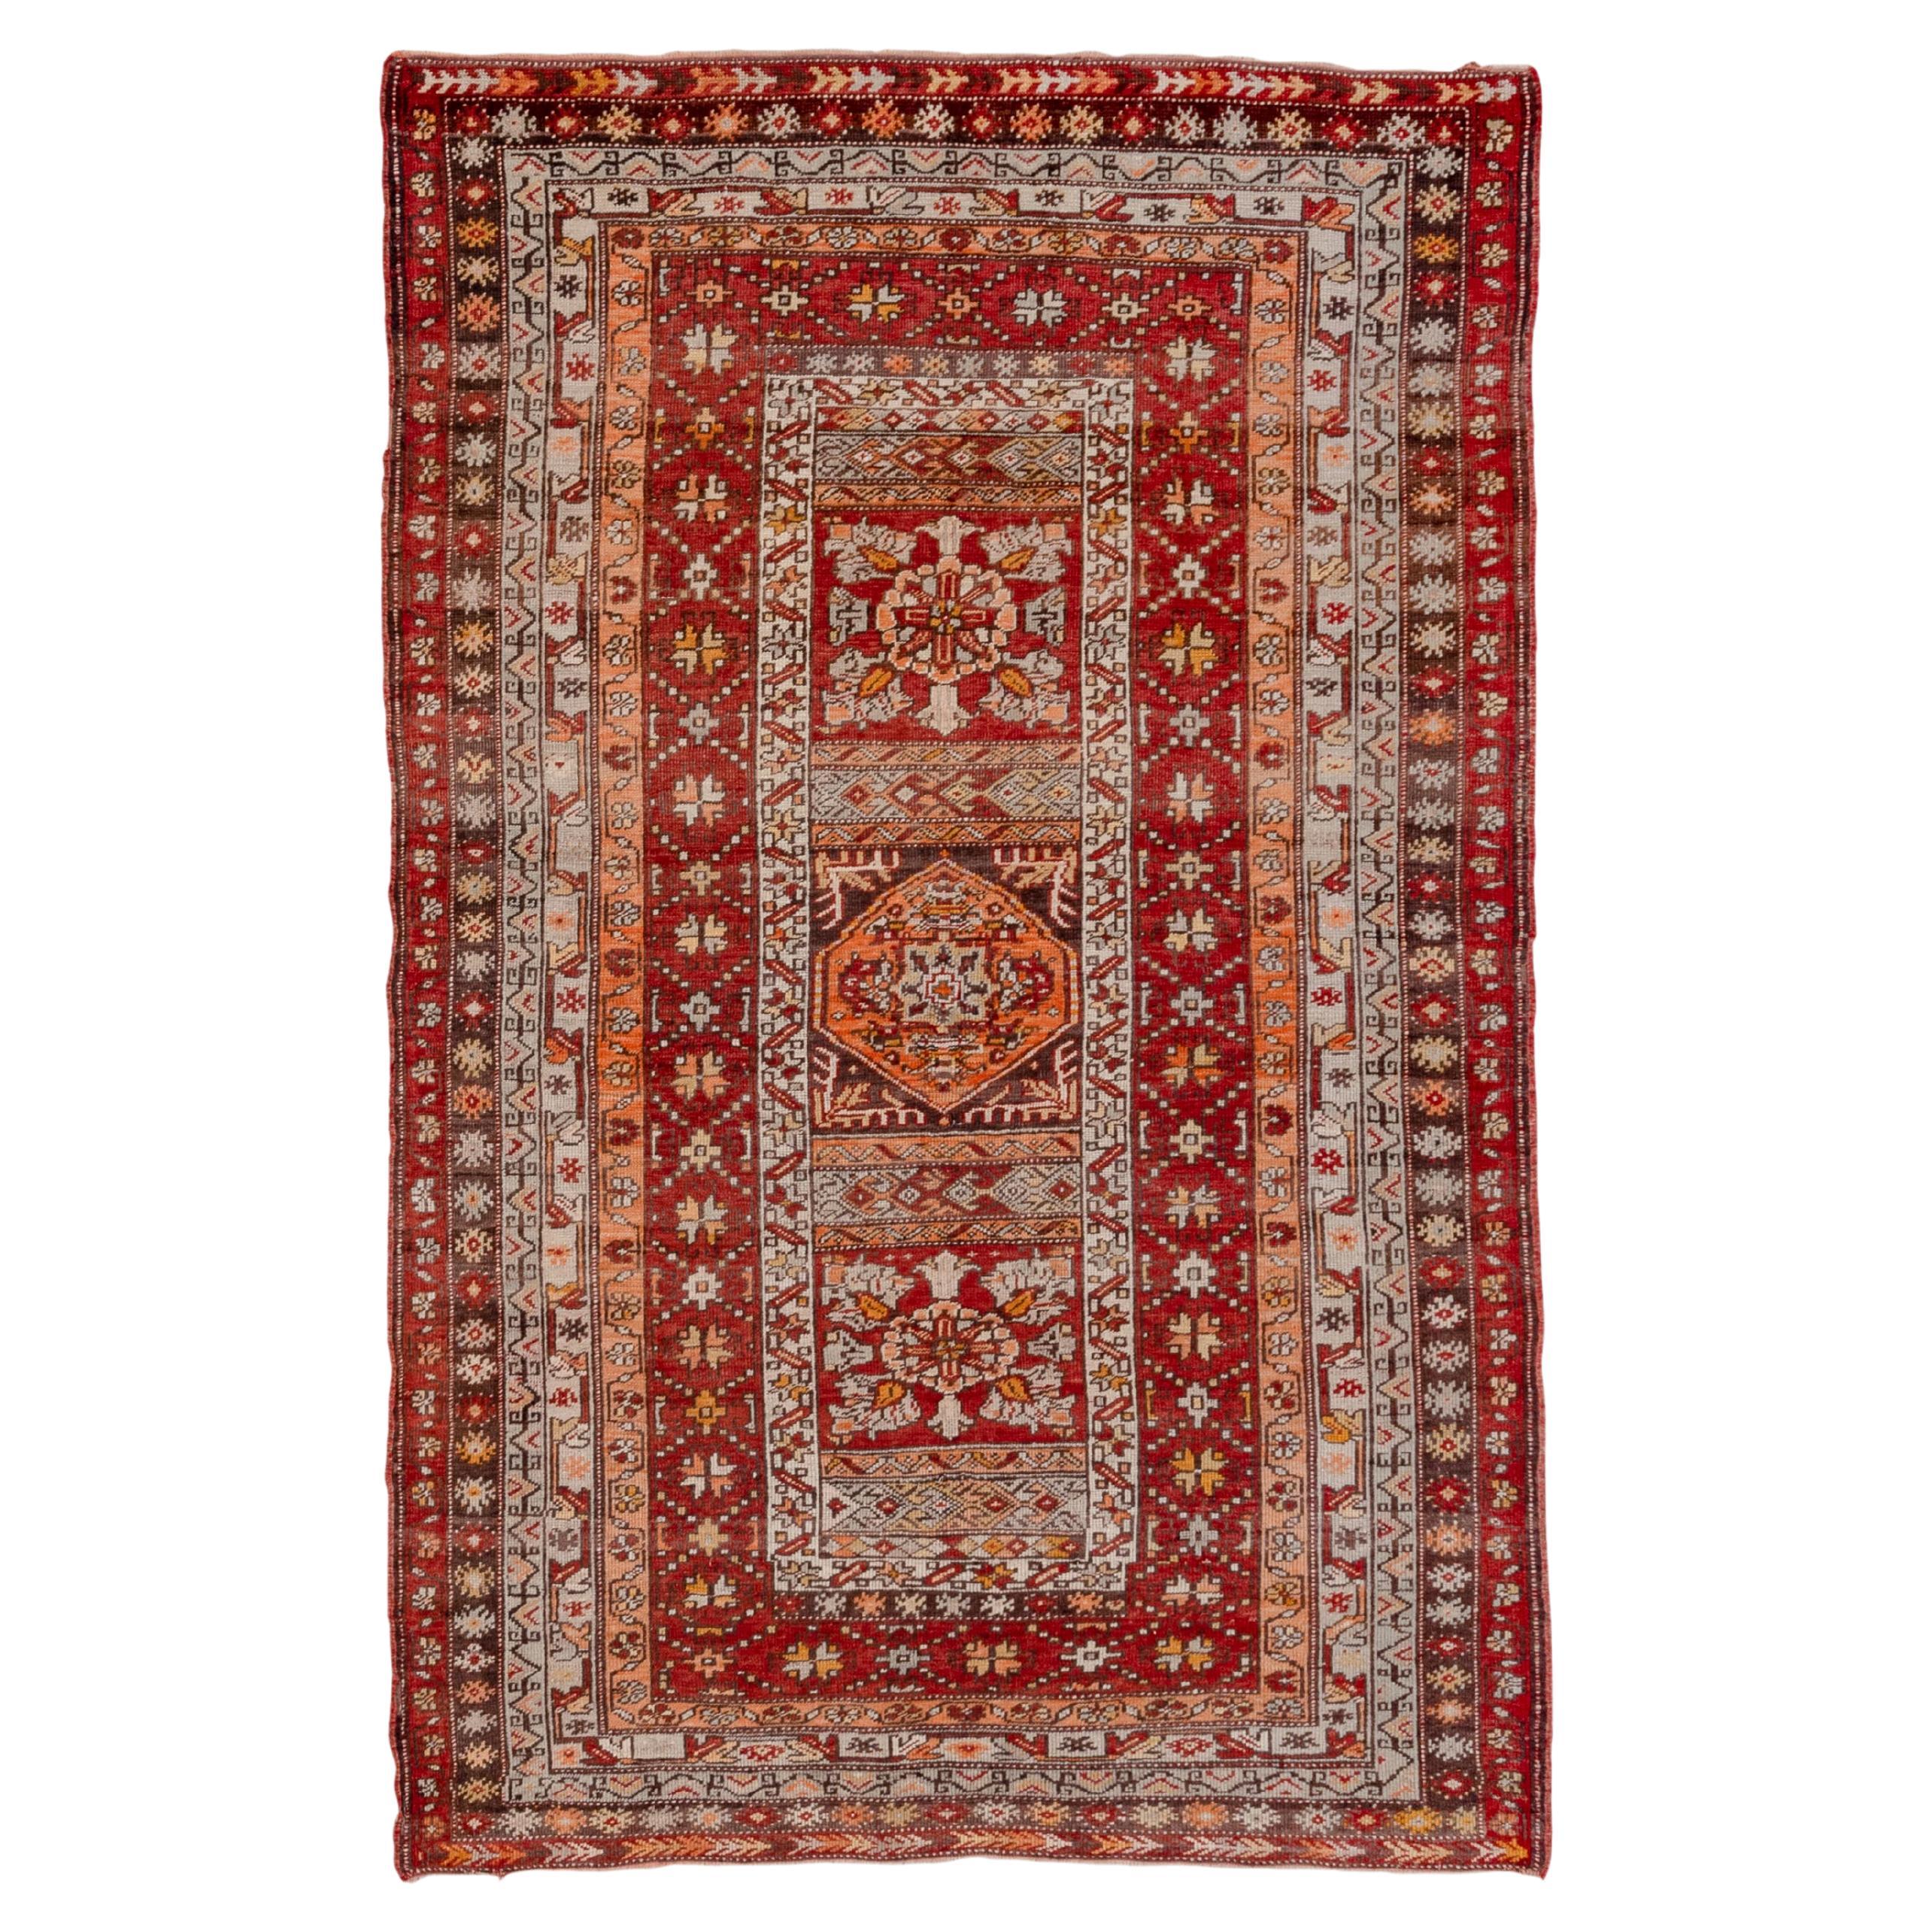 Turkish Sivas with Red Family Colors in Geometric Pattern